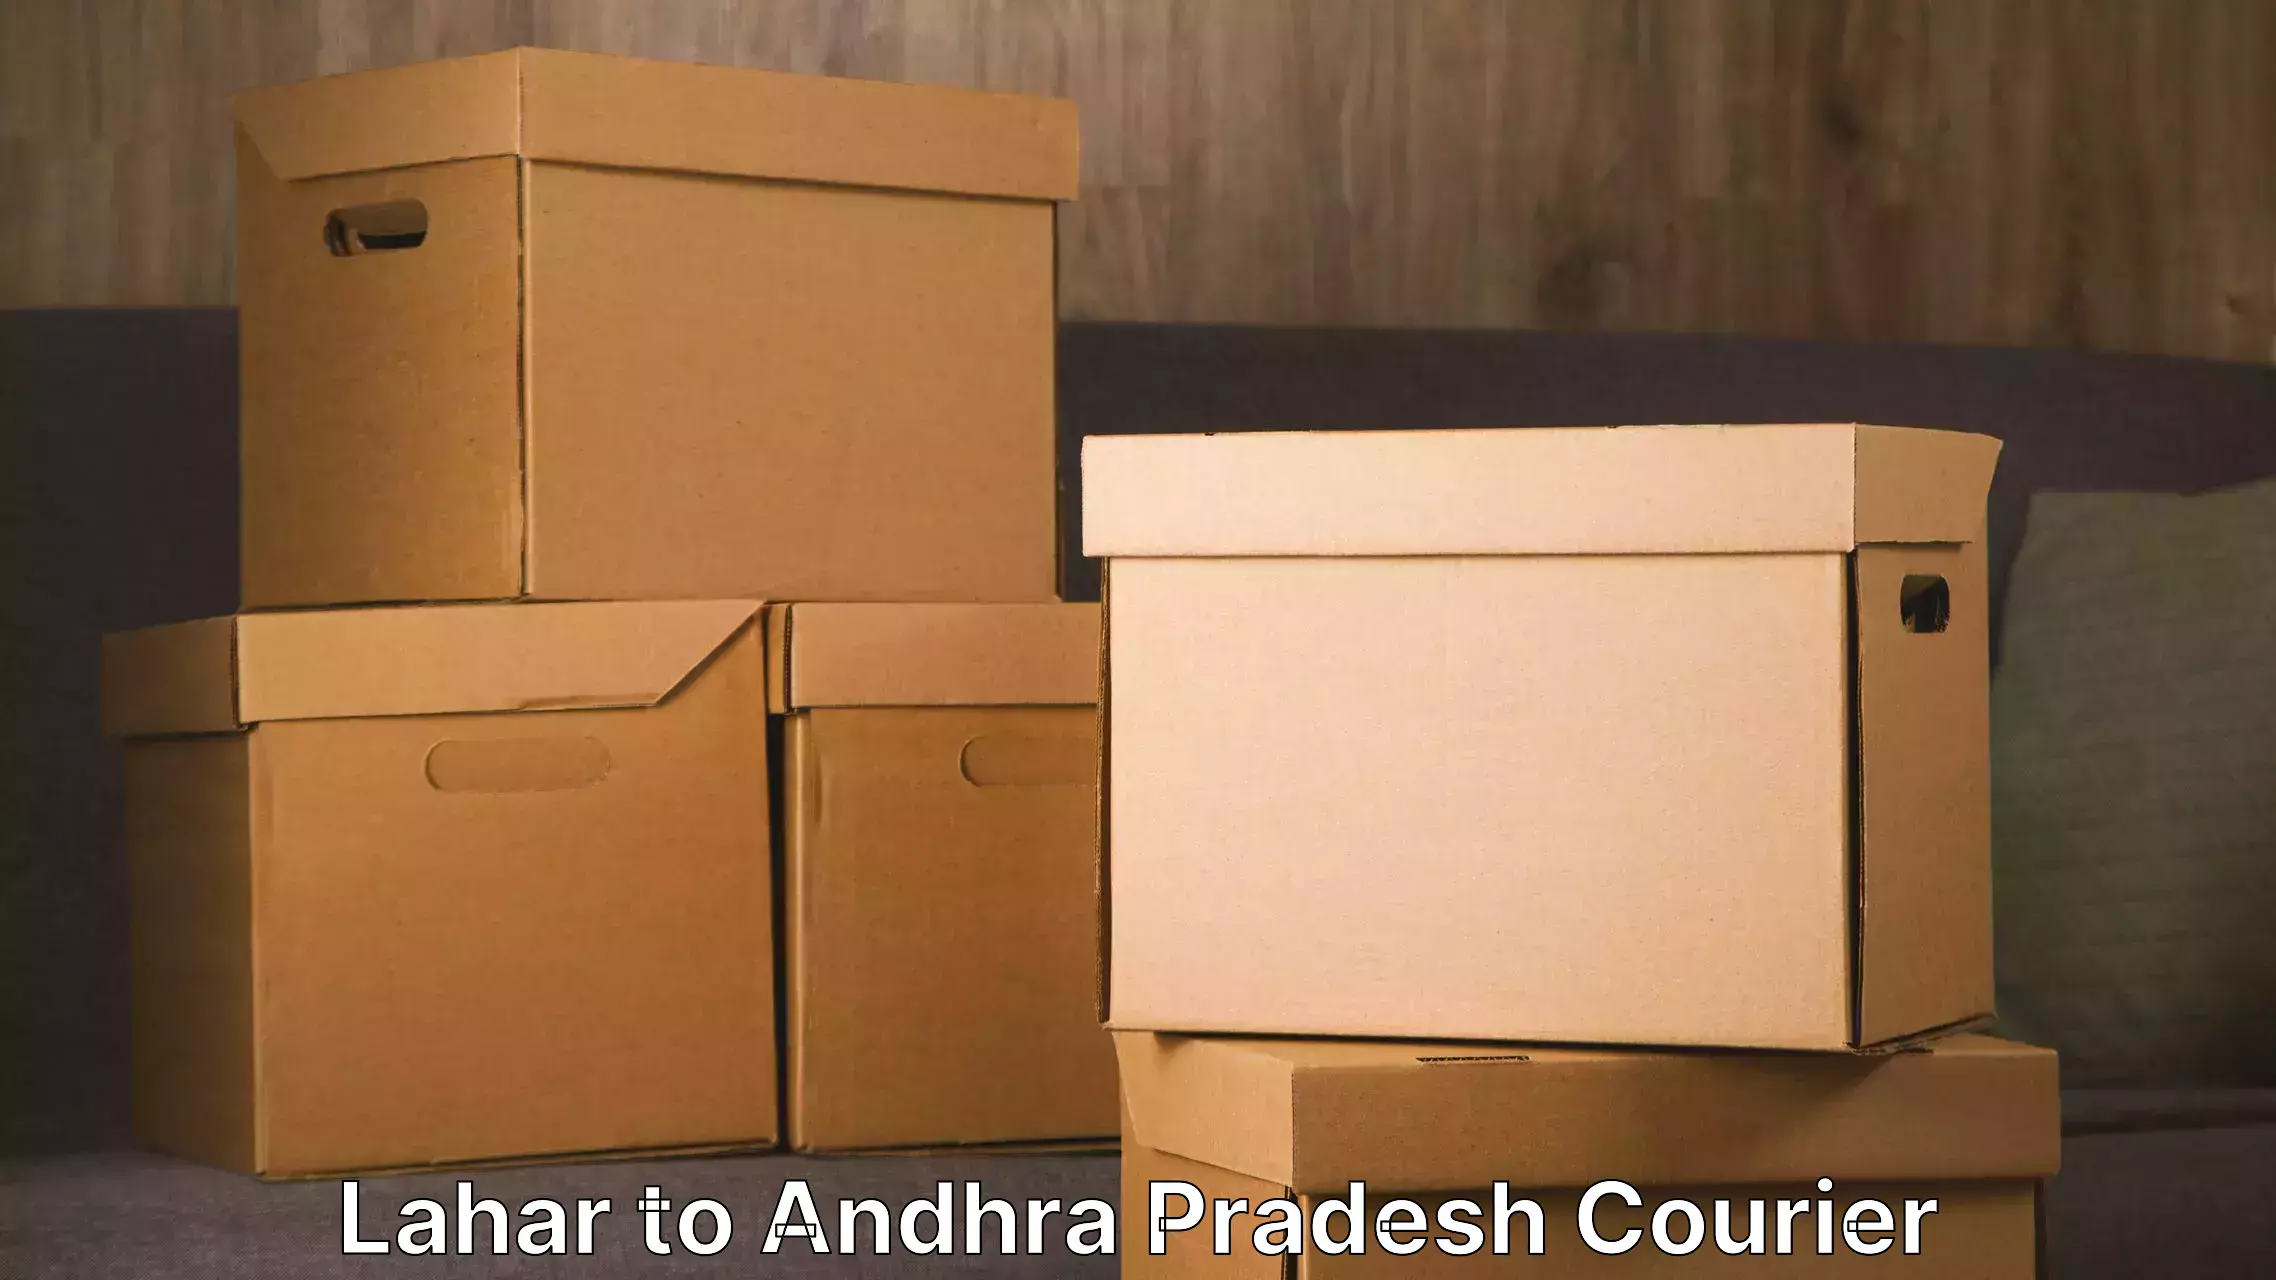 Reliable furniture movers in Lahar to Visakhapatnam Port